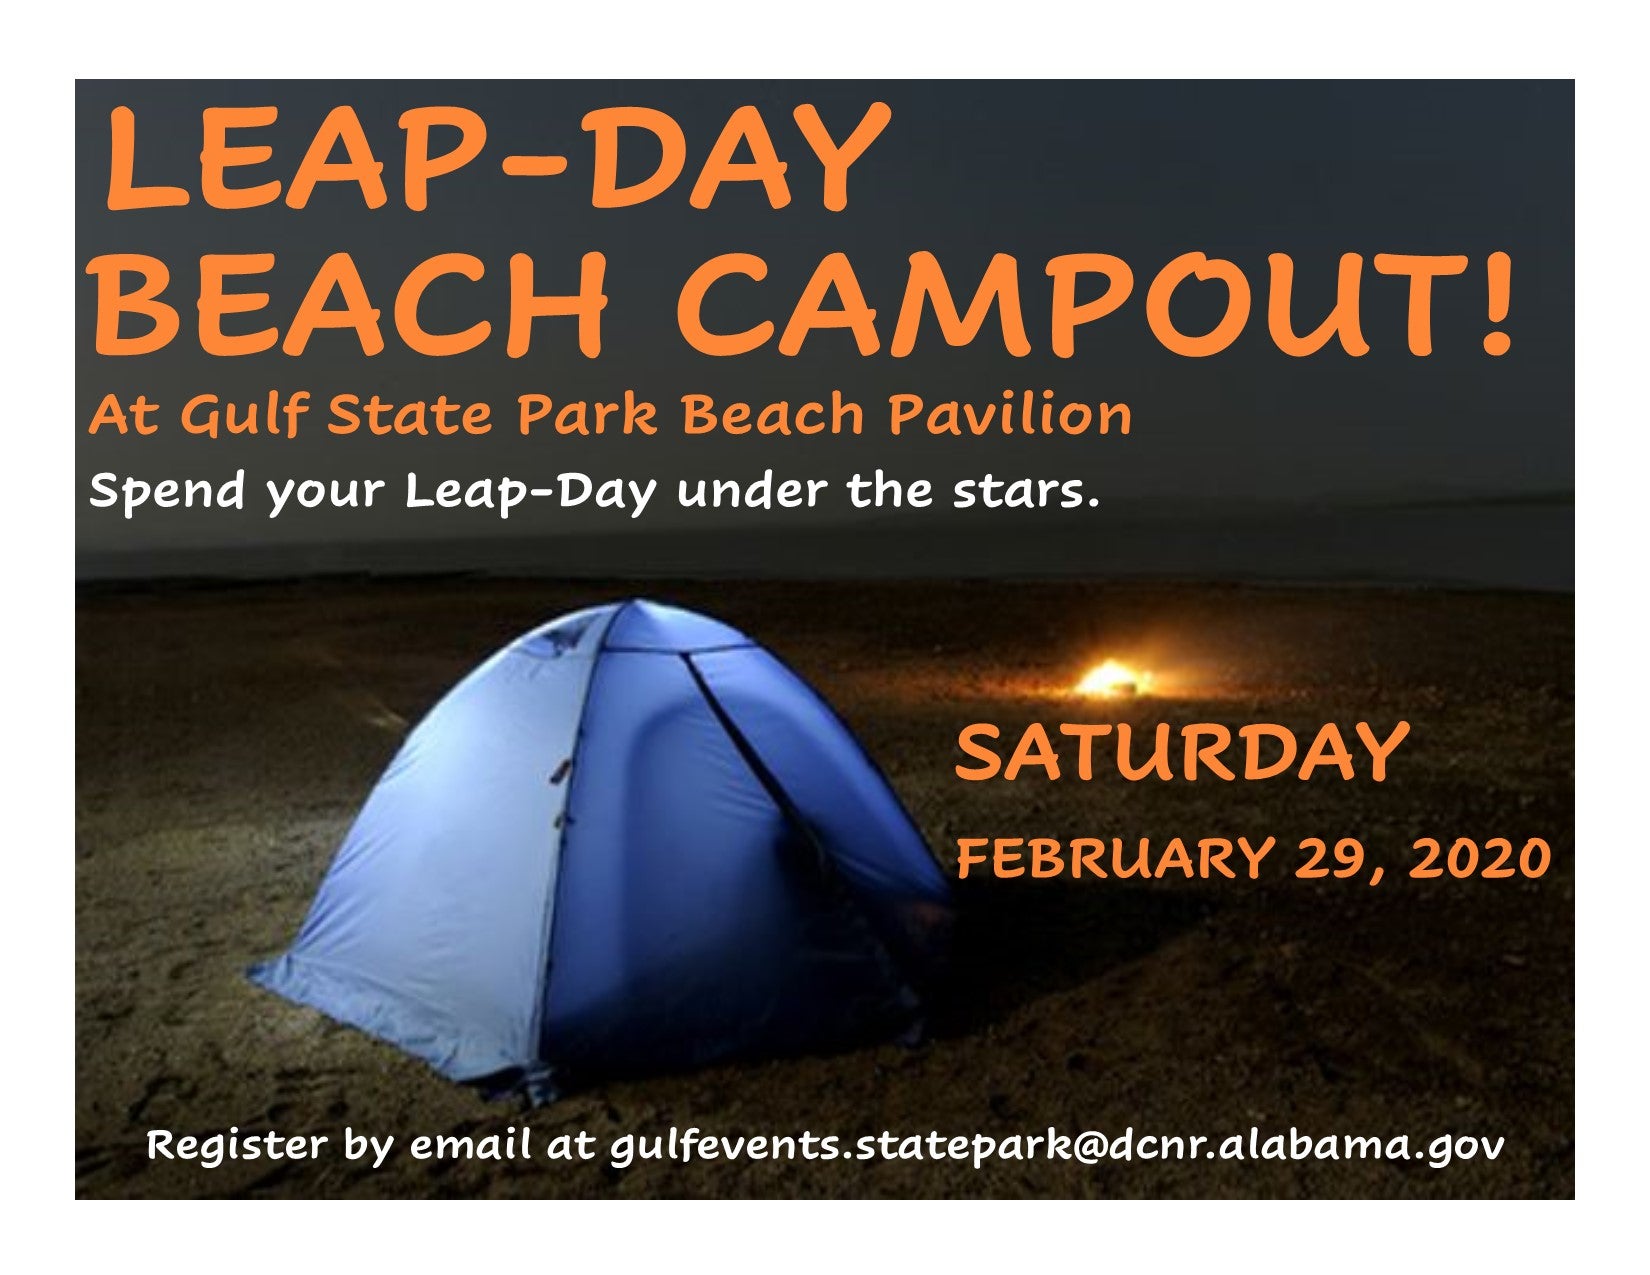 Leap-Day Beach Campout Info Flyer